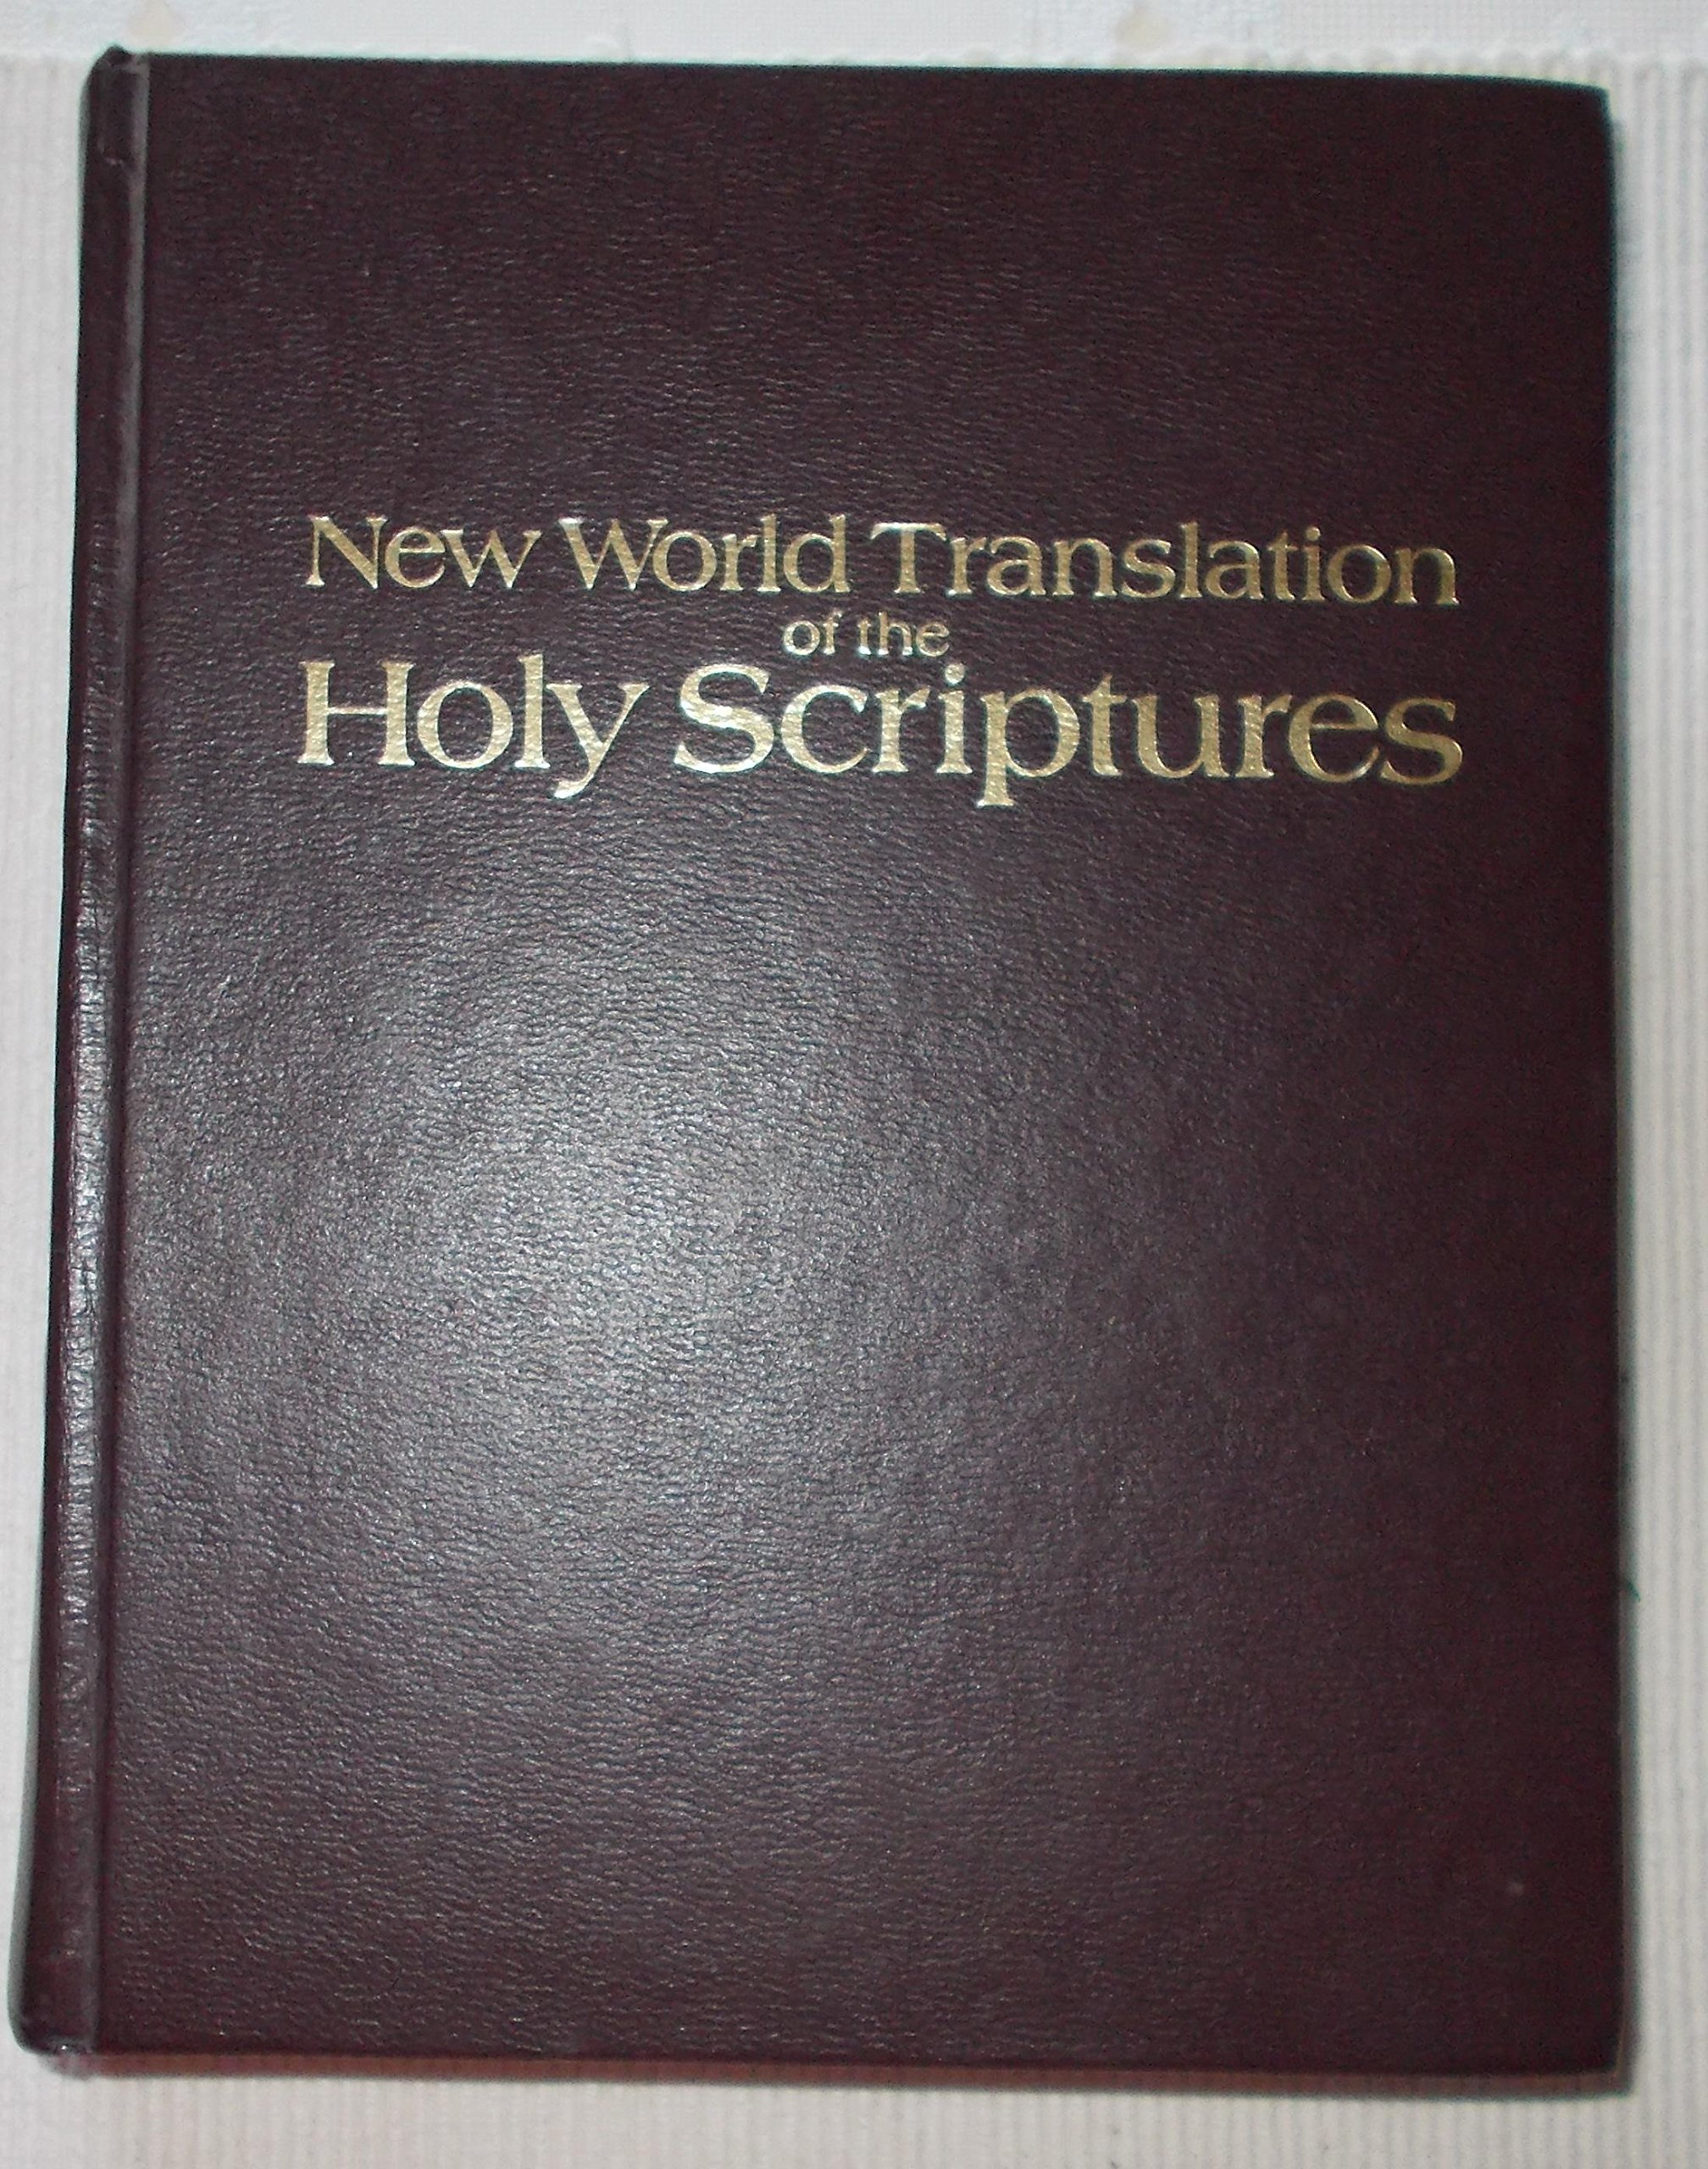 New world translation of the holy scriptures